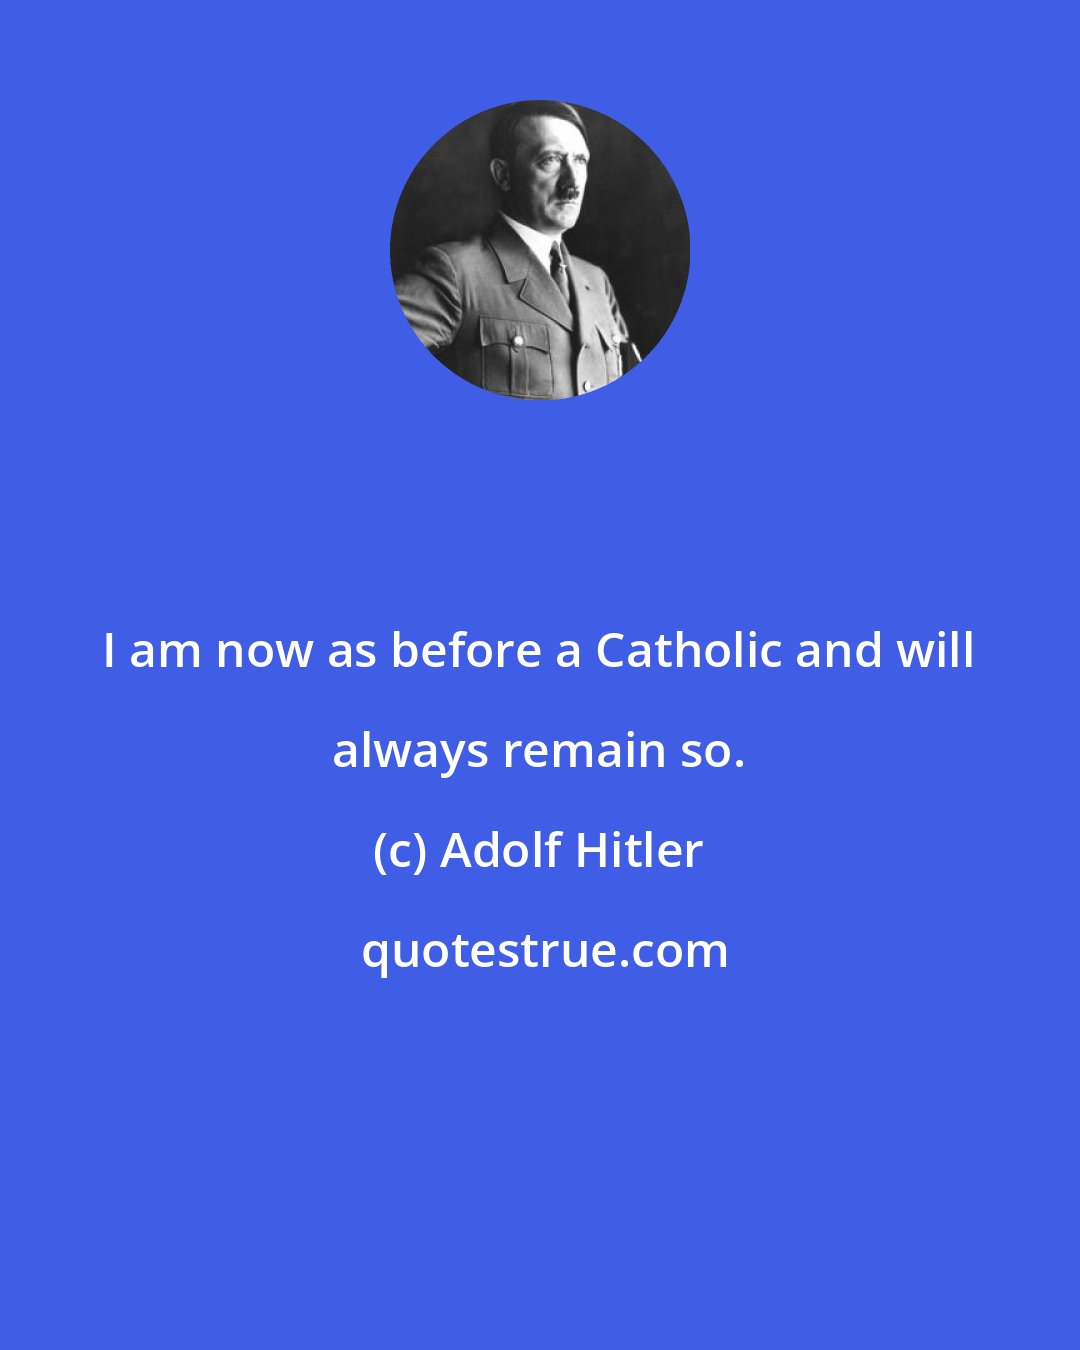 Adolf Hitler: I am now as before a Catholic and will always remain so.